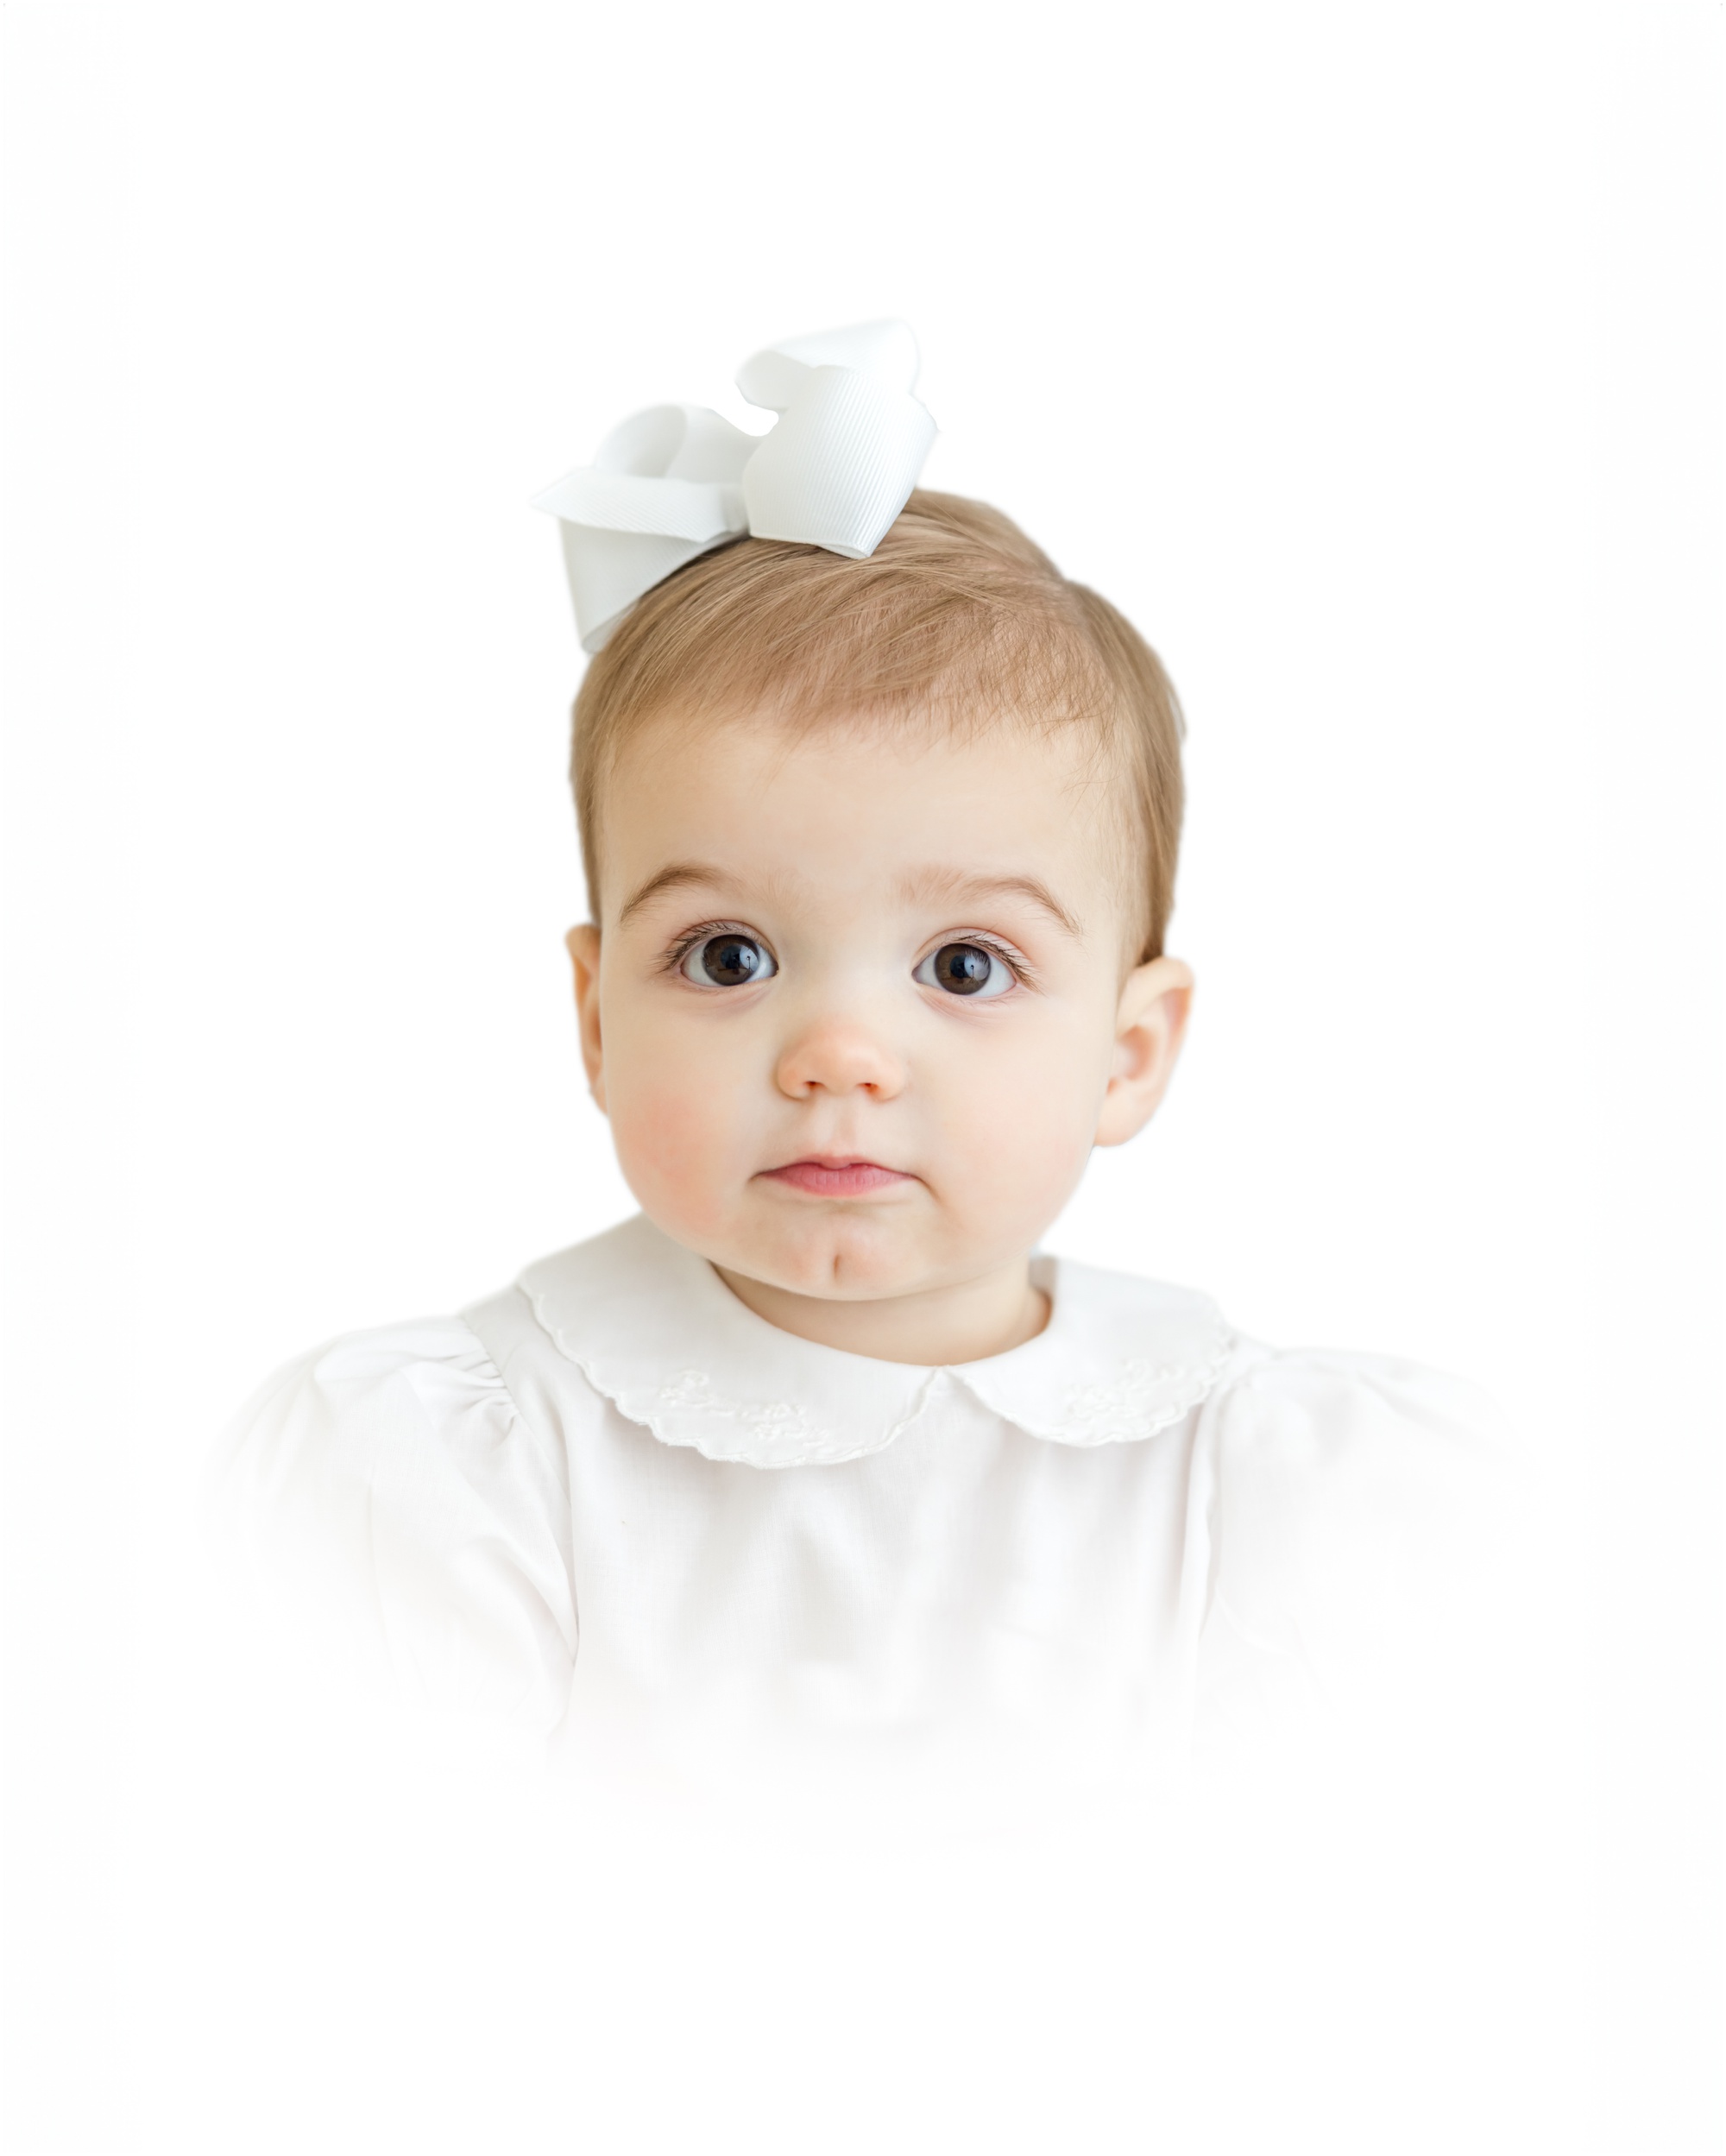 A traditional heirloom portrait of a one year old girl with a serious expression in white with a white bow with a white vignette by Greenville photographer Molly Hensley.